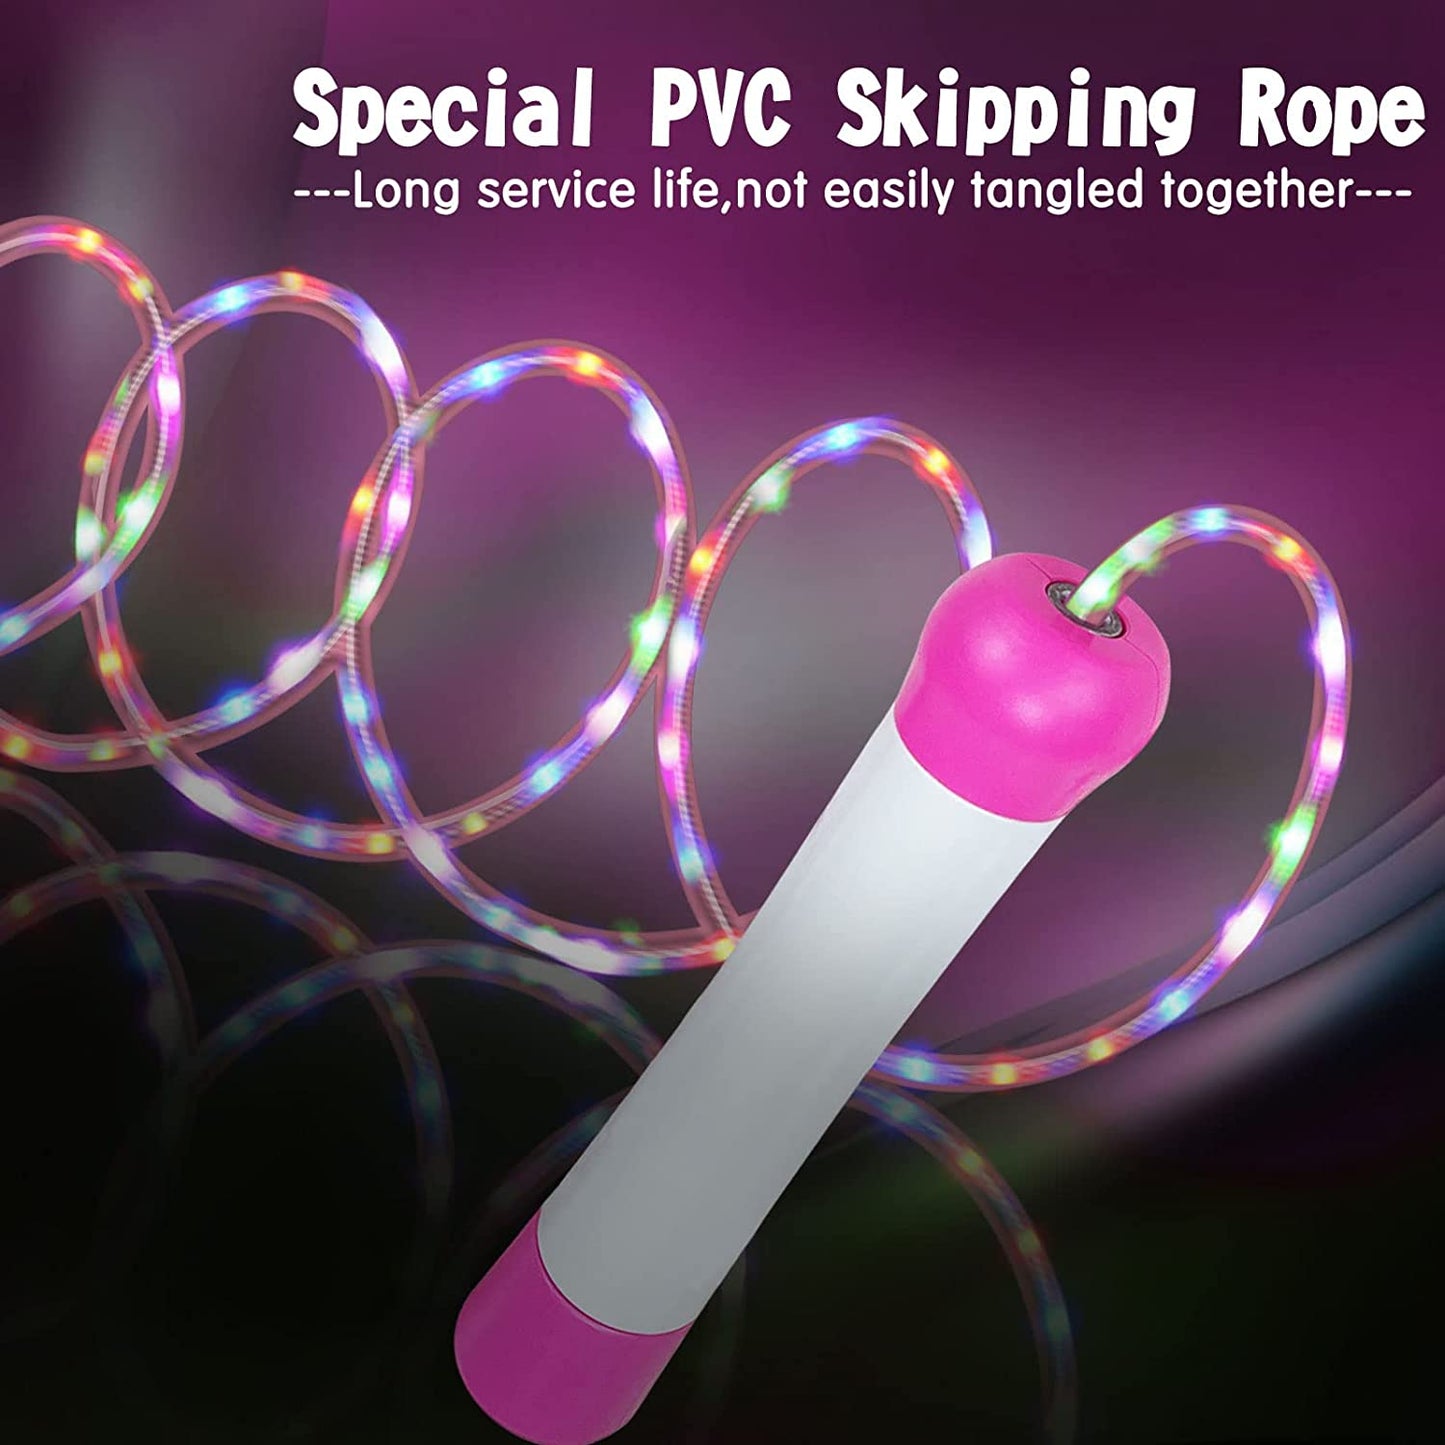 Led Jump Rope for Girls Kids - Flashing Colorful Exercise Jump rope Light Up Luminous Adjustable Skipping Ropes for Girls Boys Women Fitness Weight Loss